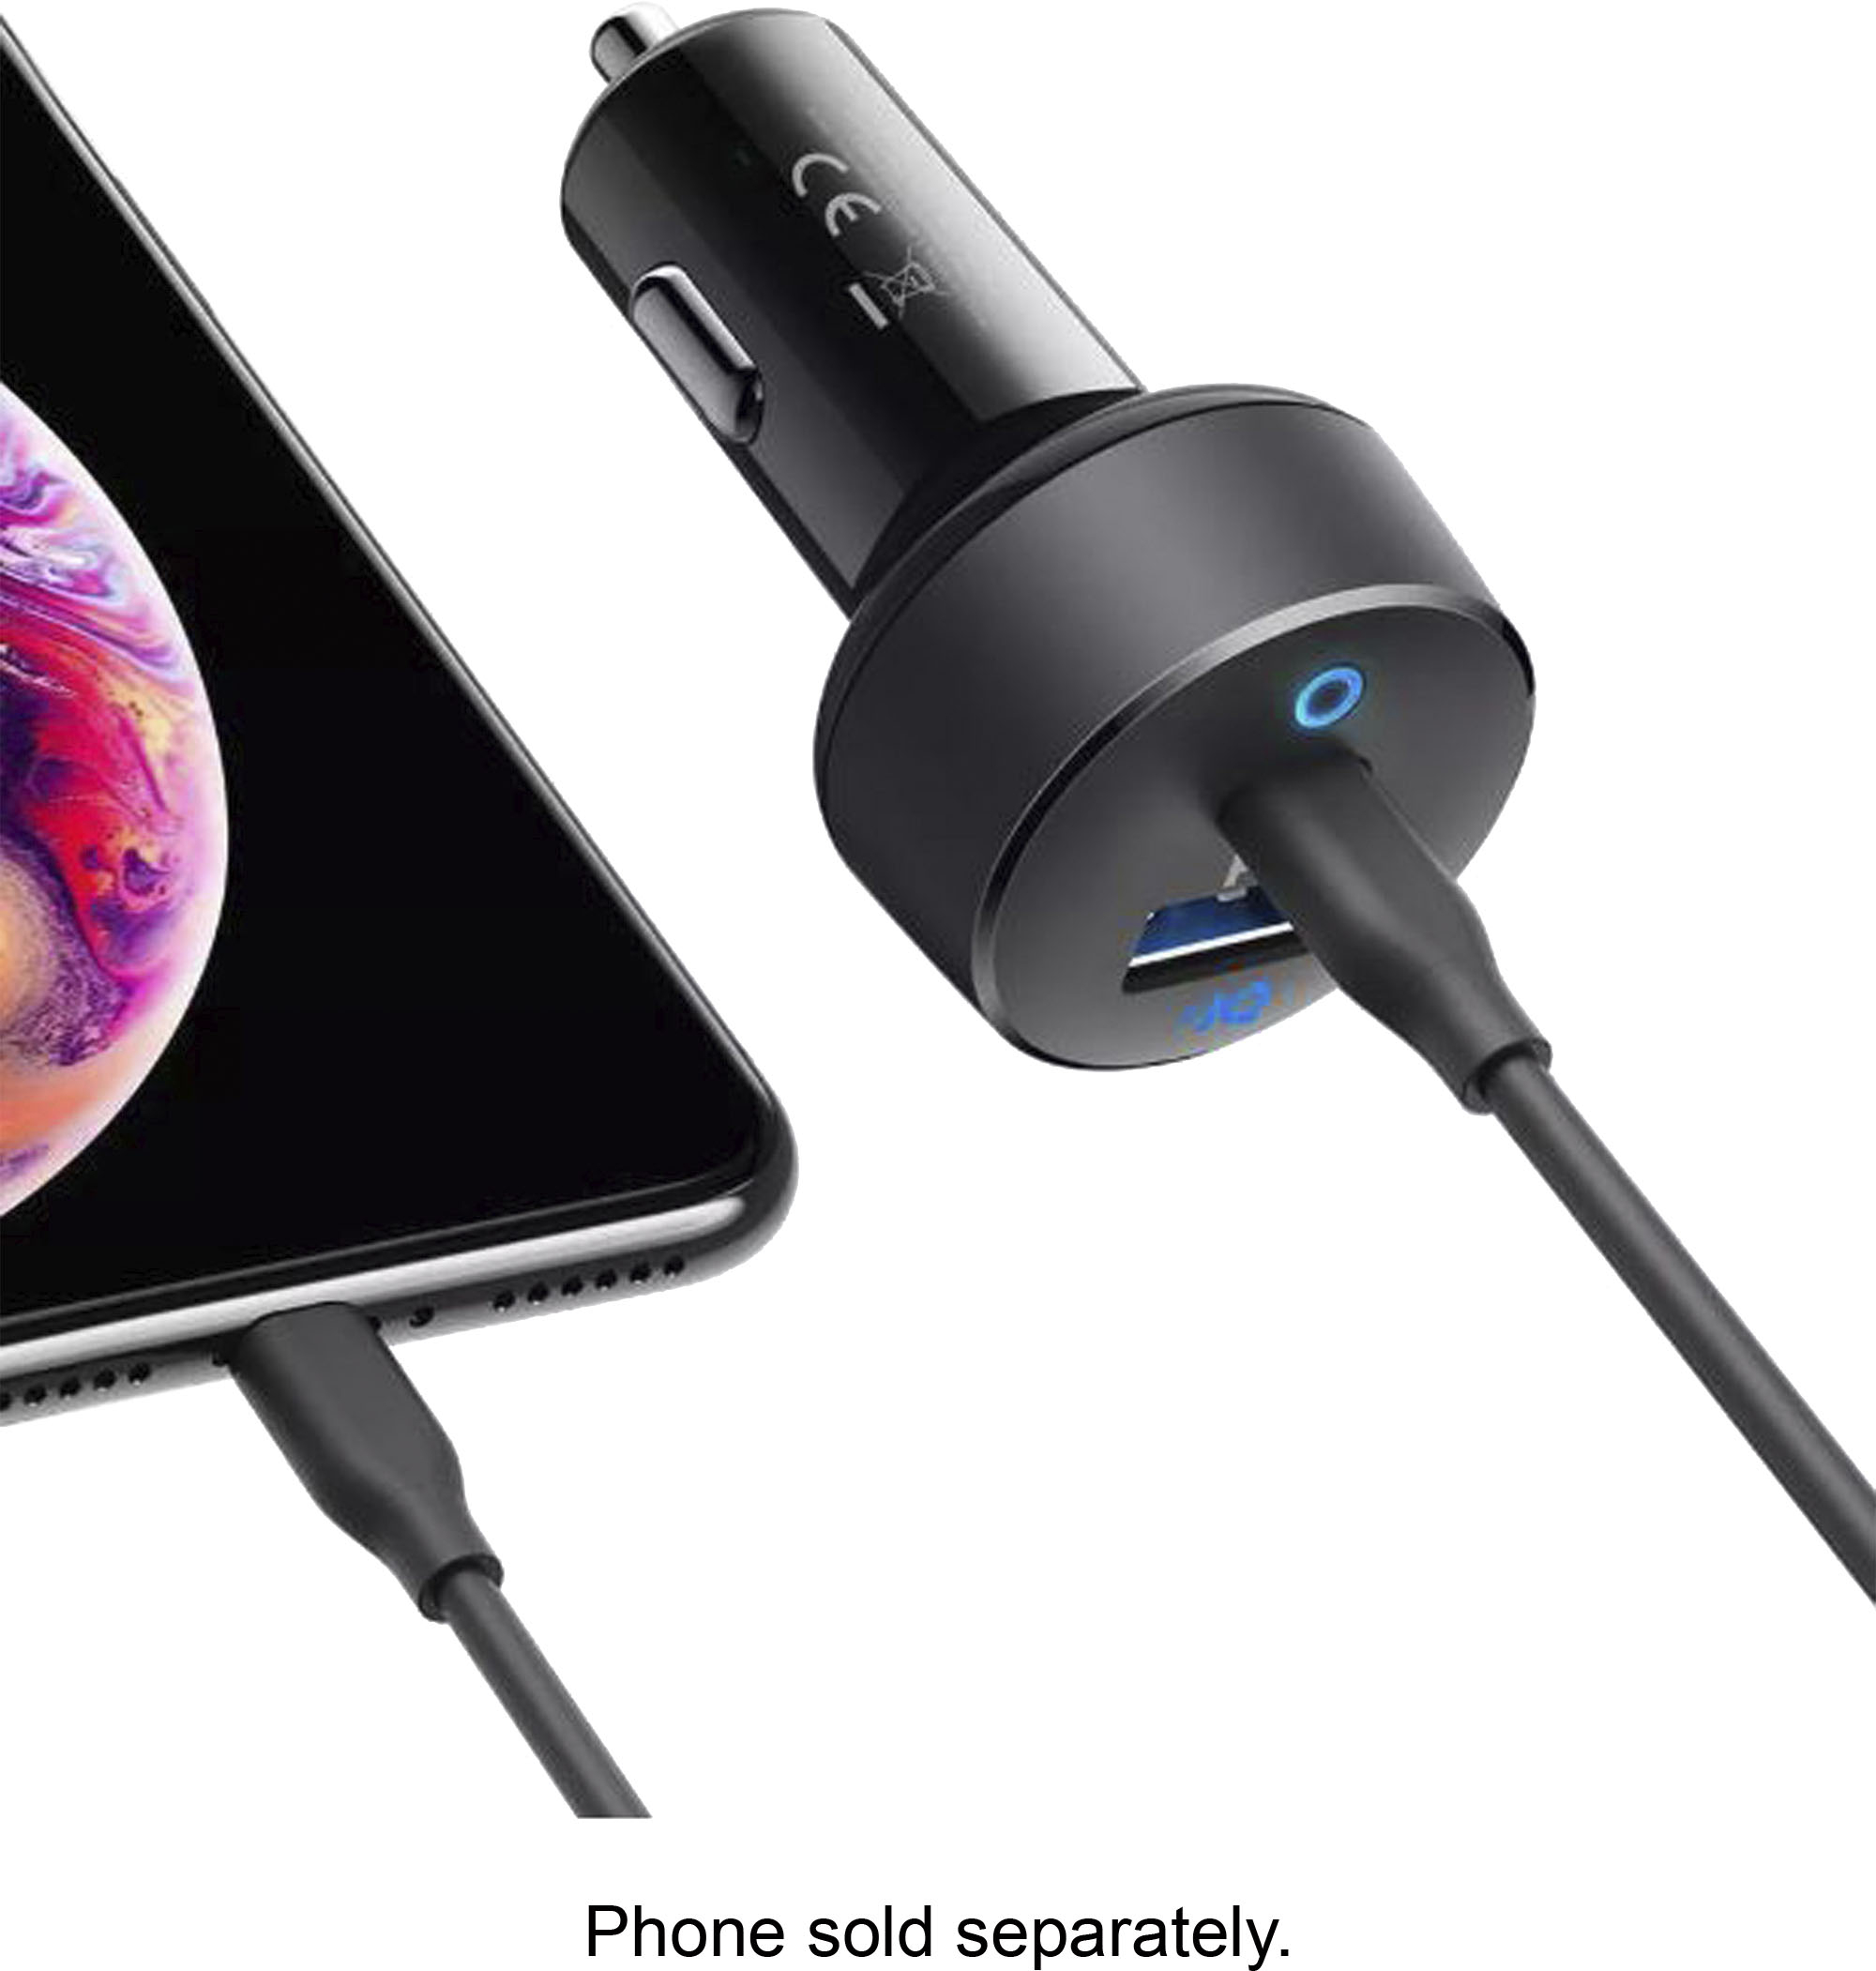 Best Buy: Anker PowerDrive+ 6ft USB-C Cable Dual USB Car Charger